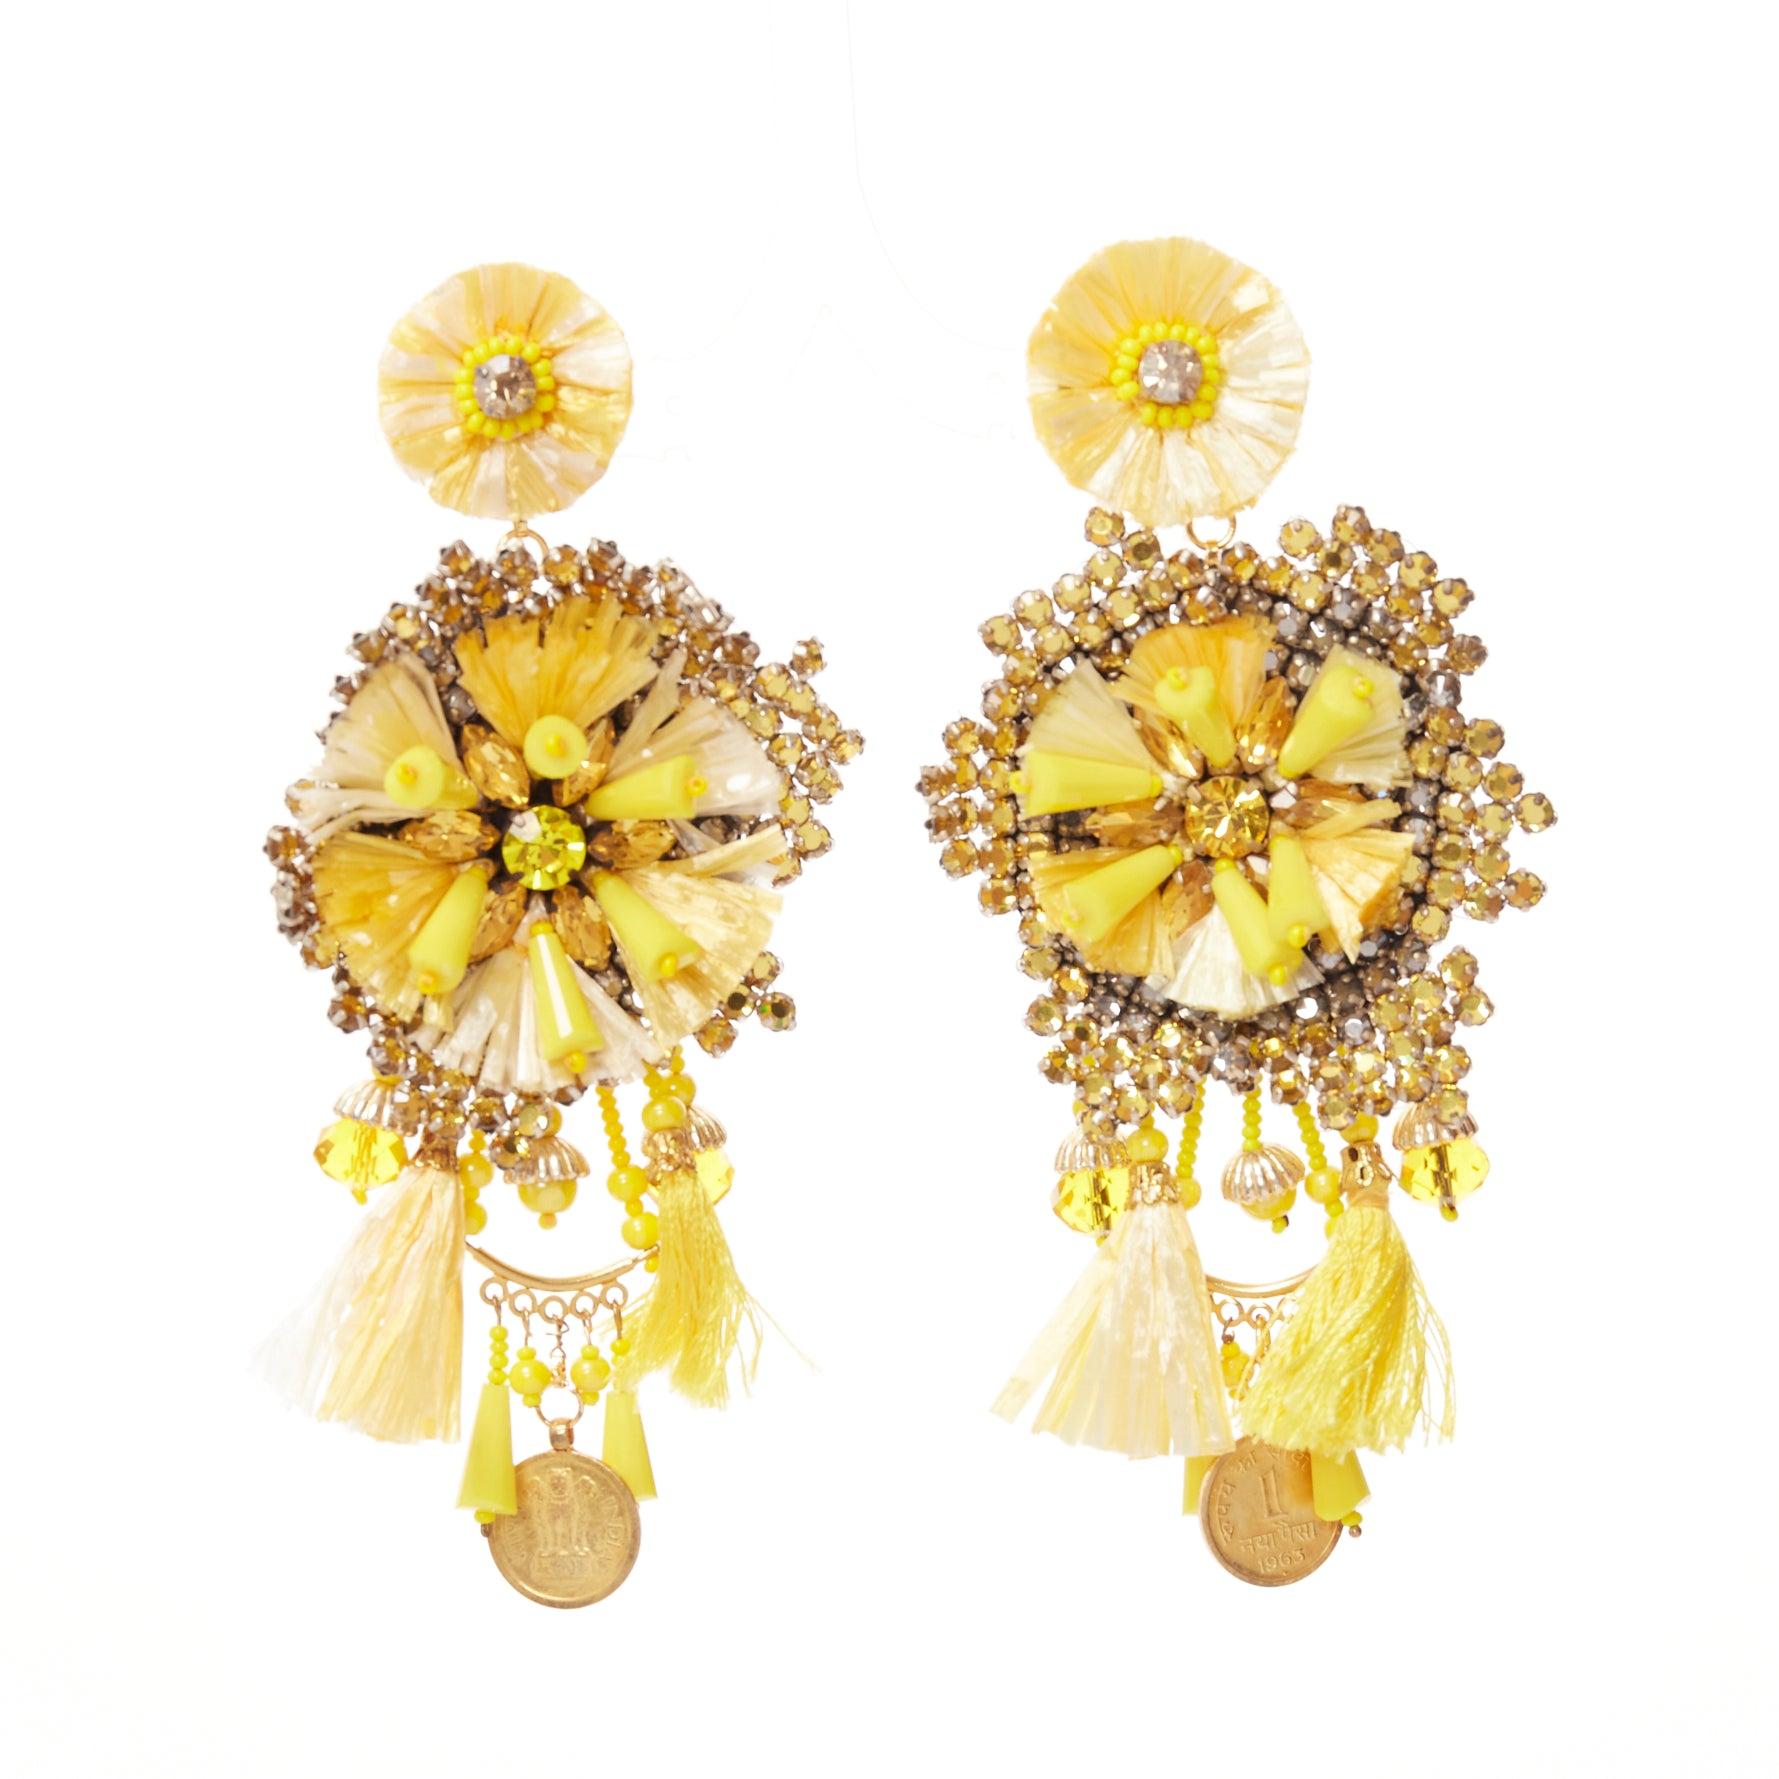 RANJANA KHAN yellow beads tassel crystals strass dangling clip on earrings
Reference: AAWC/A01211
Brand: Ranjana Khan
Material: Raffia
Color: Yellow
Pattern: Solid
Closure: Clip On
Lining: Yellow Leather
Extra Details: Yellow leather